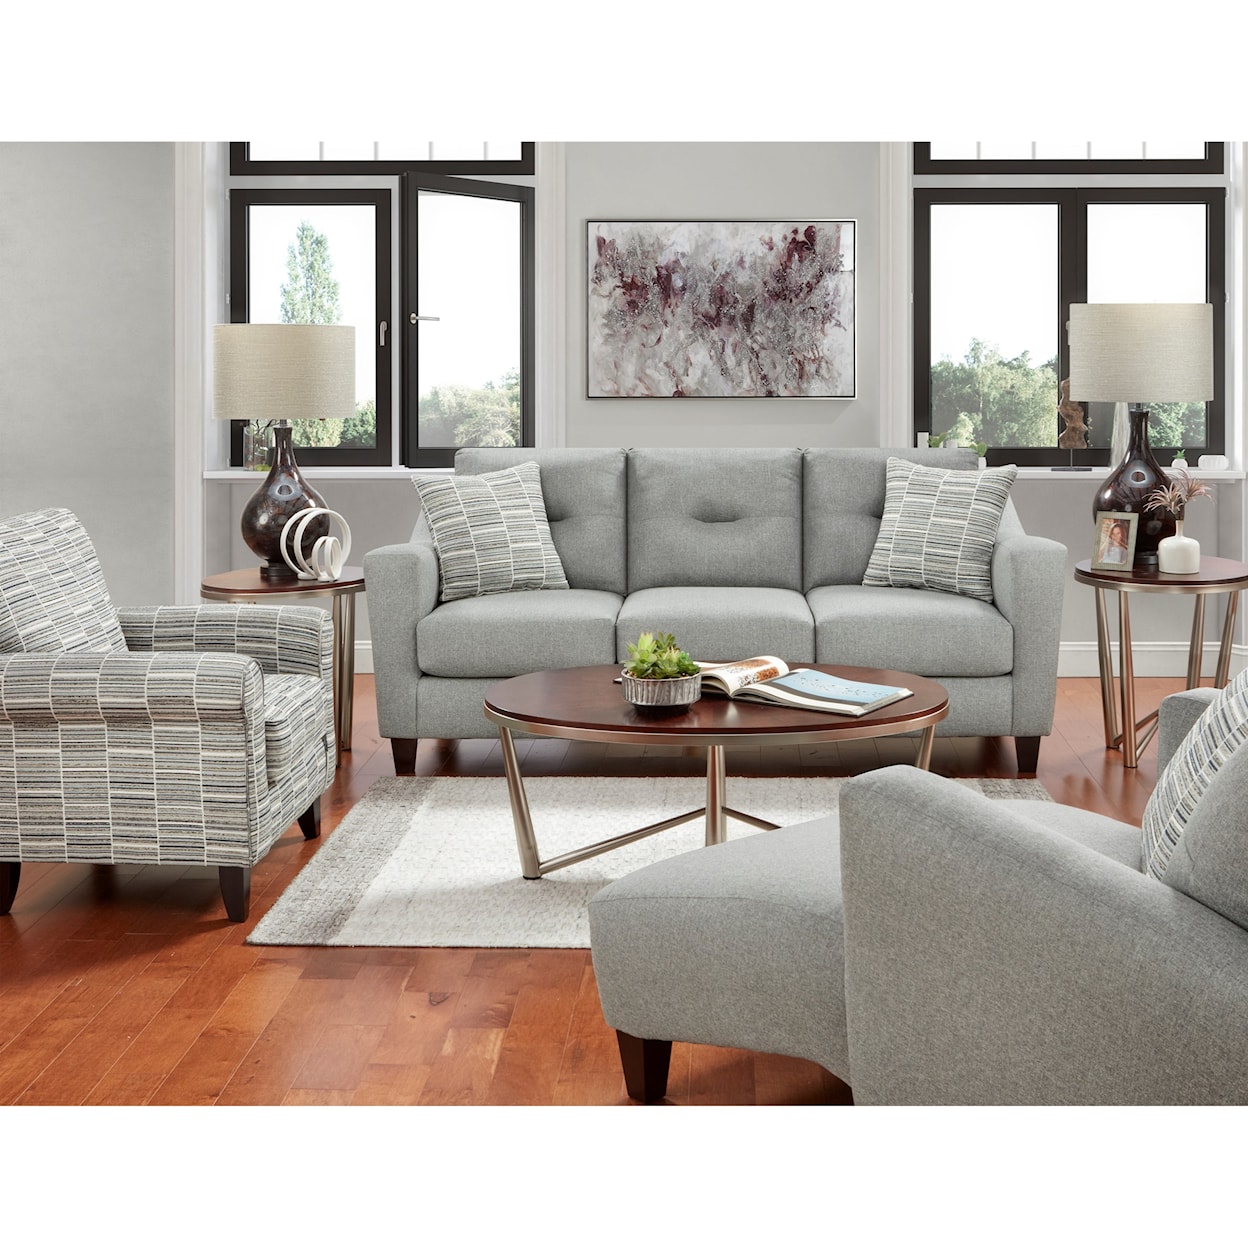 Fusion Furniture 8210 TNT CHARCOAL Living Room Group